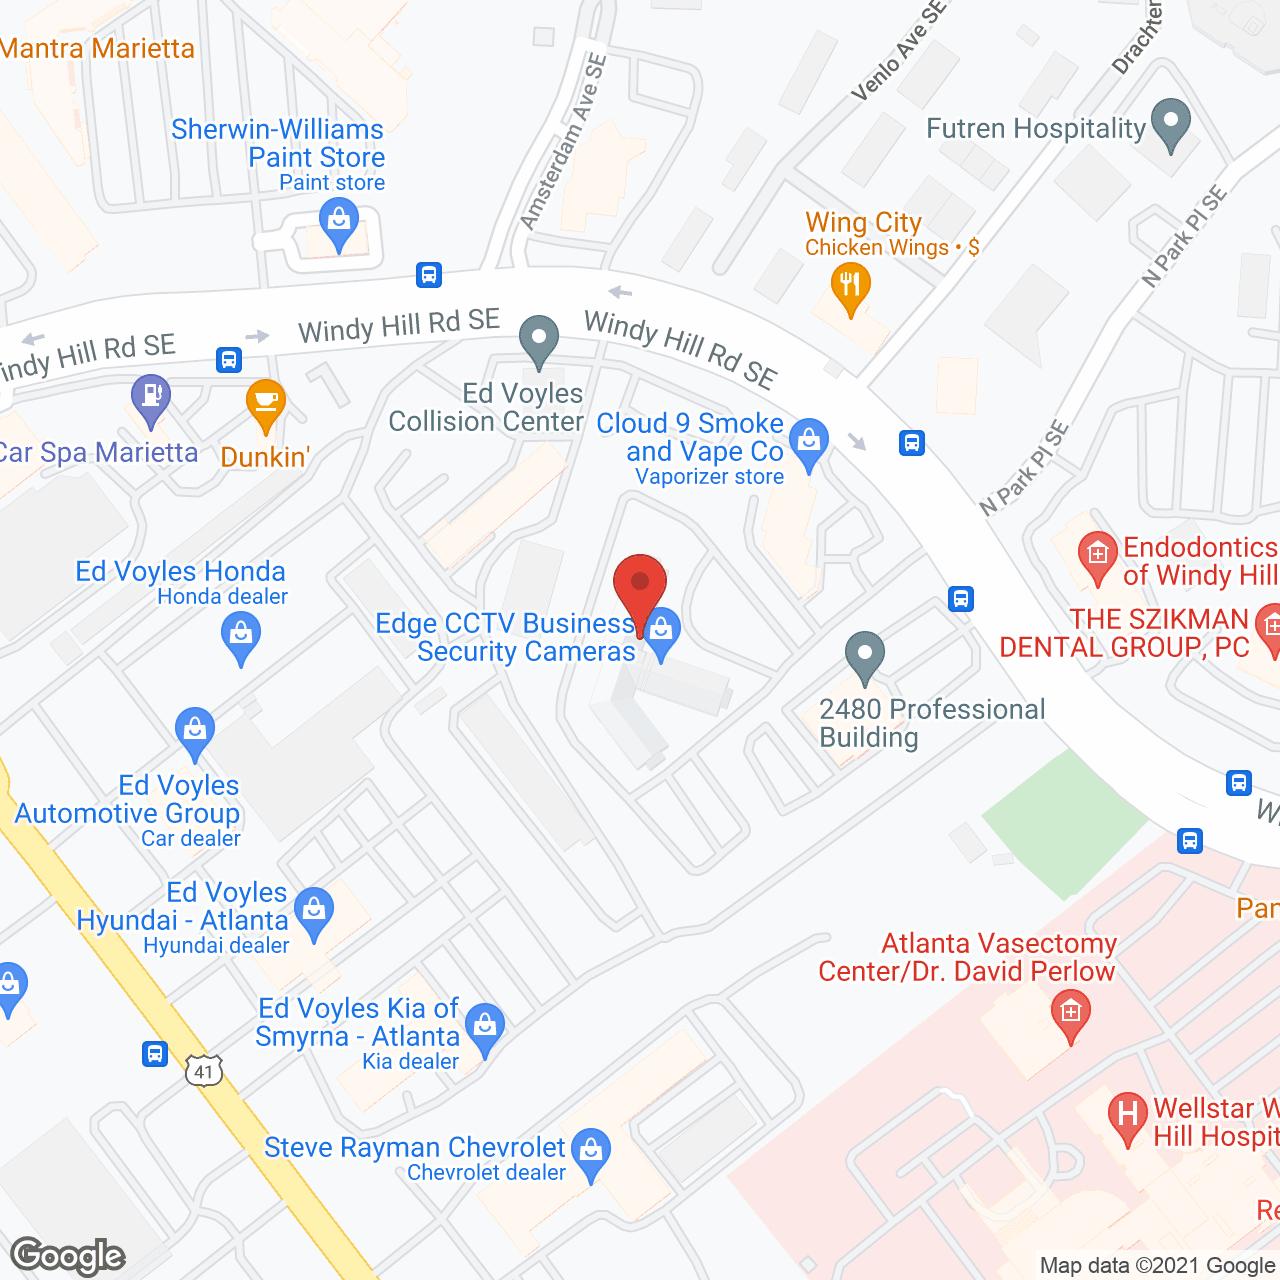 Better Life Home Care Services Inc - Marietta in google map